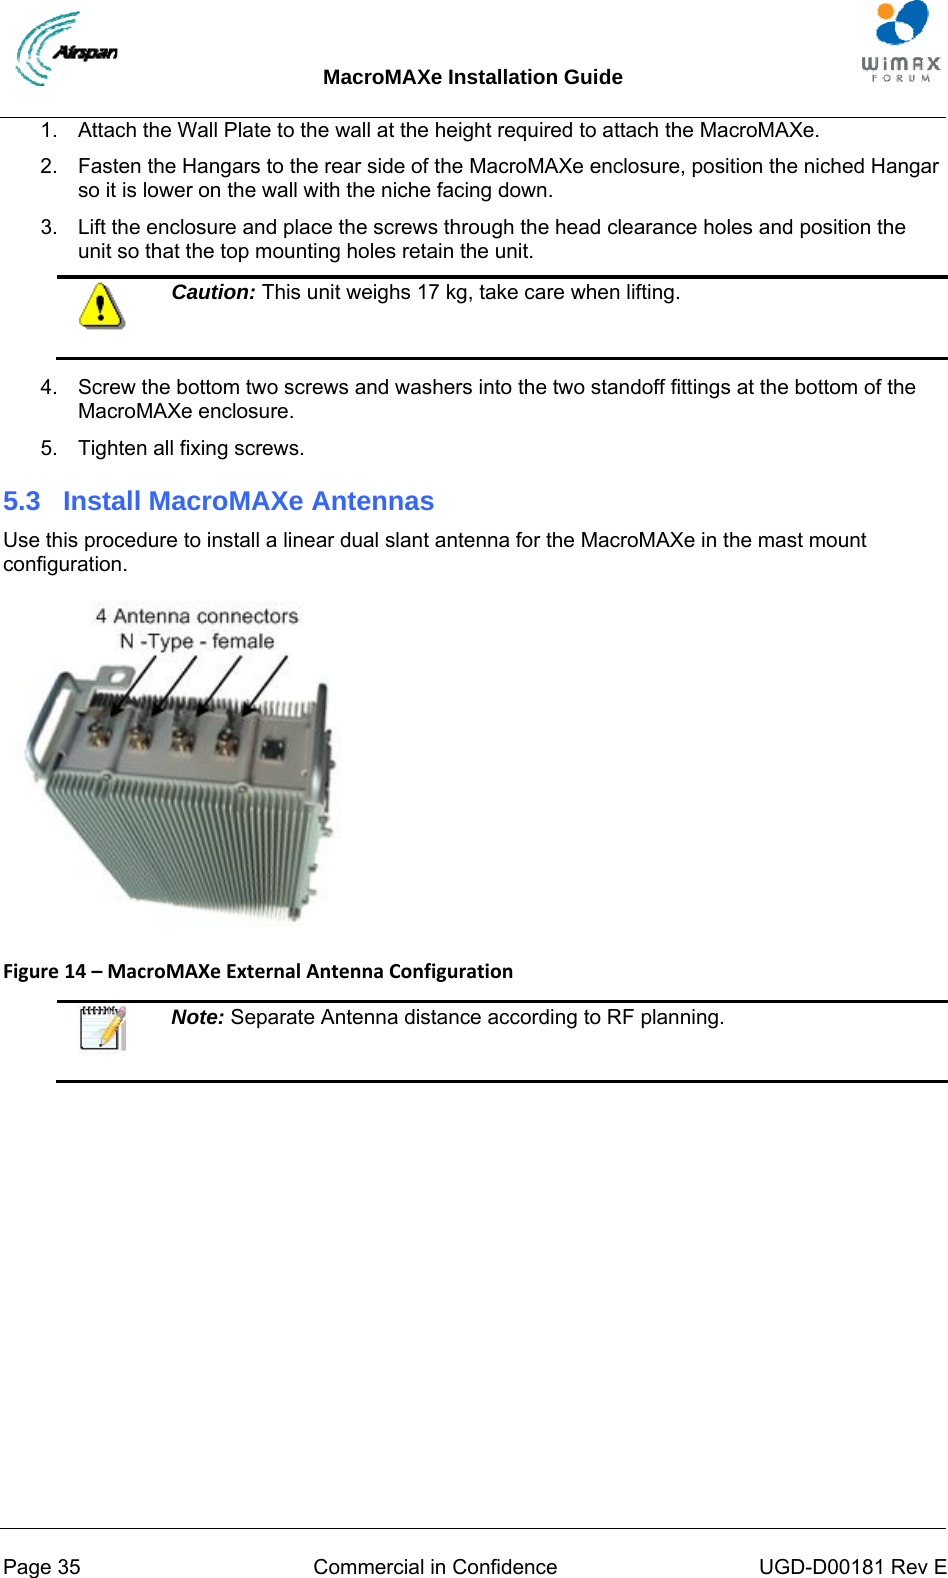 MacroMAXe Installation Guide  Page 35  Commercial in Confidence  UGD-D00181 Rev E 1.  Attach the Wall Plate to the wall at the height required to attach the MacroMAXe. 2.  Fasten the Hangars to the rear side of the MacroMAXe enclosure, position the niched Hangar so it is lower on the wall with the niche facing down. 3.  Lift the enclosure and place the screws through the head clearance holes and position the unit so that the top mounting holes retain the unit.  Caution: This unit weighs 17 kg, take care when lifting.  4.  Screw the bottom two screws and washers into the two standoff fittings at the bottom of the MacroMAXe enclosure. 5.  Tighten all fixing screws. 5.3  Install MacroMAXe Antennas Use this procedure to install a linear dual slant antenna for the MacroMAXe in the mast mount configuration.  Figure14–MacroMAXeExternalAntennaConfiguration   Note: Separate Antenna distance according to RF planning.  